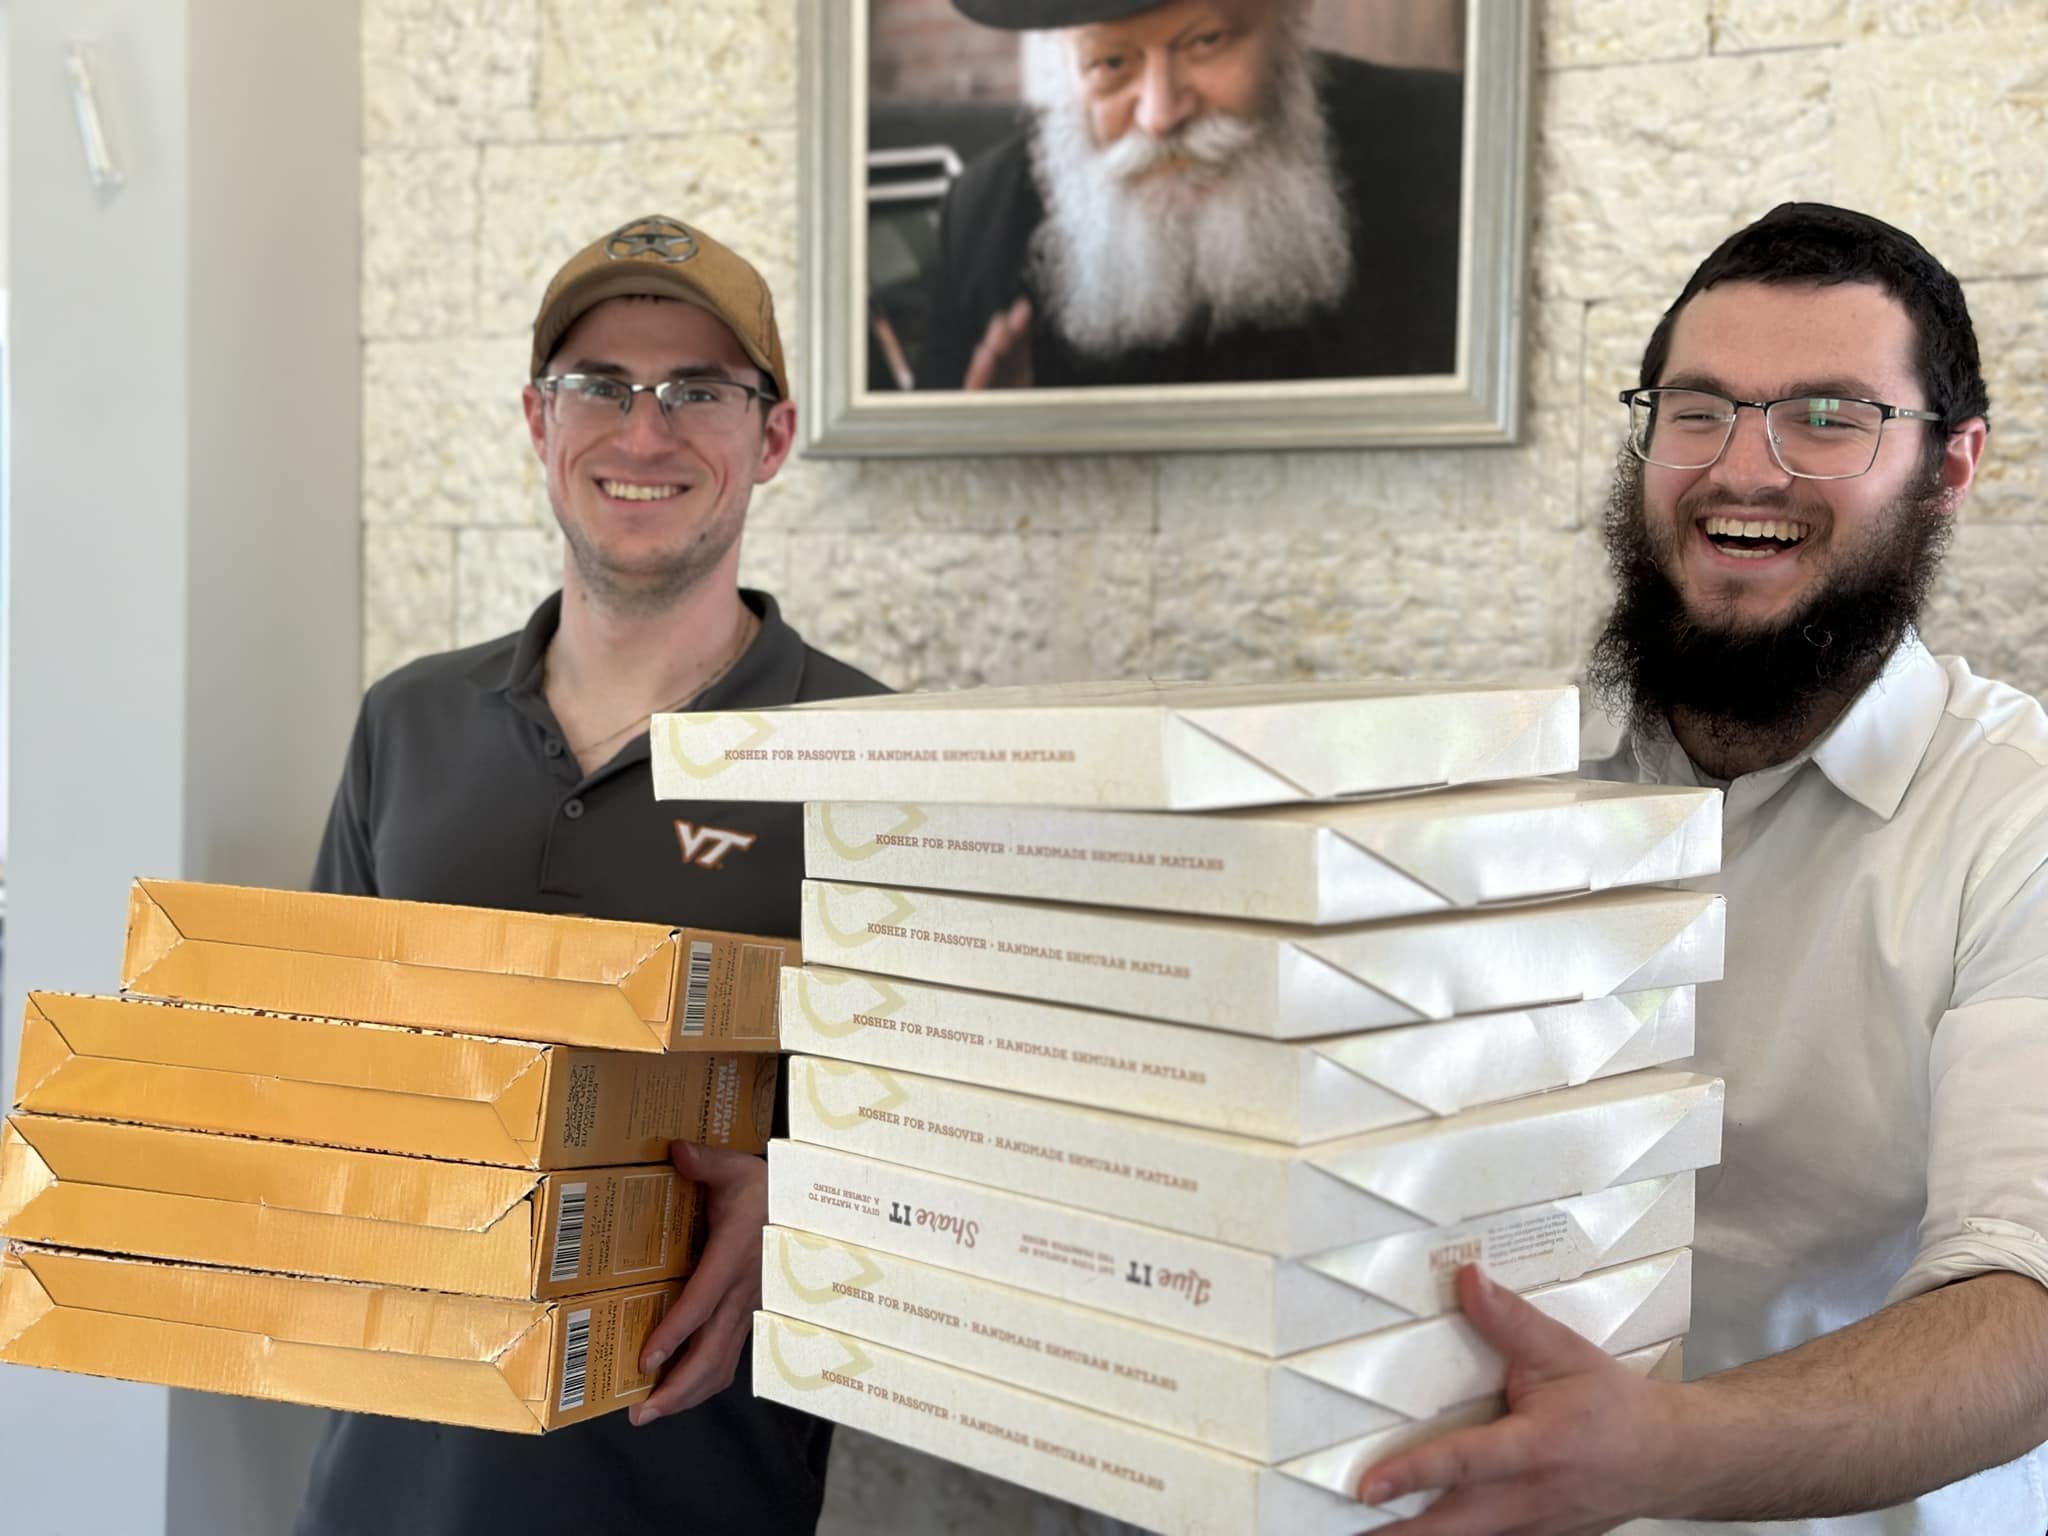 Yakov and Zac are in town!
They will be going around the greater Pensacola area giving out special handmade Matza for those celebrating Passover at home. 
If you know someone who would appreciate a Passover Matza gift, DM me.

PS 
Come meet them on S